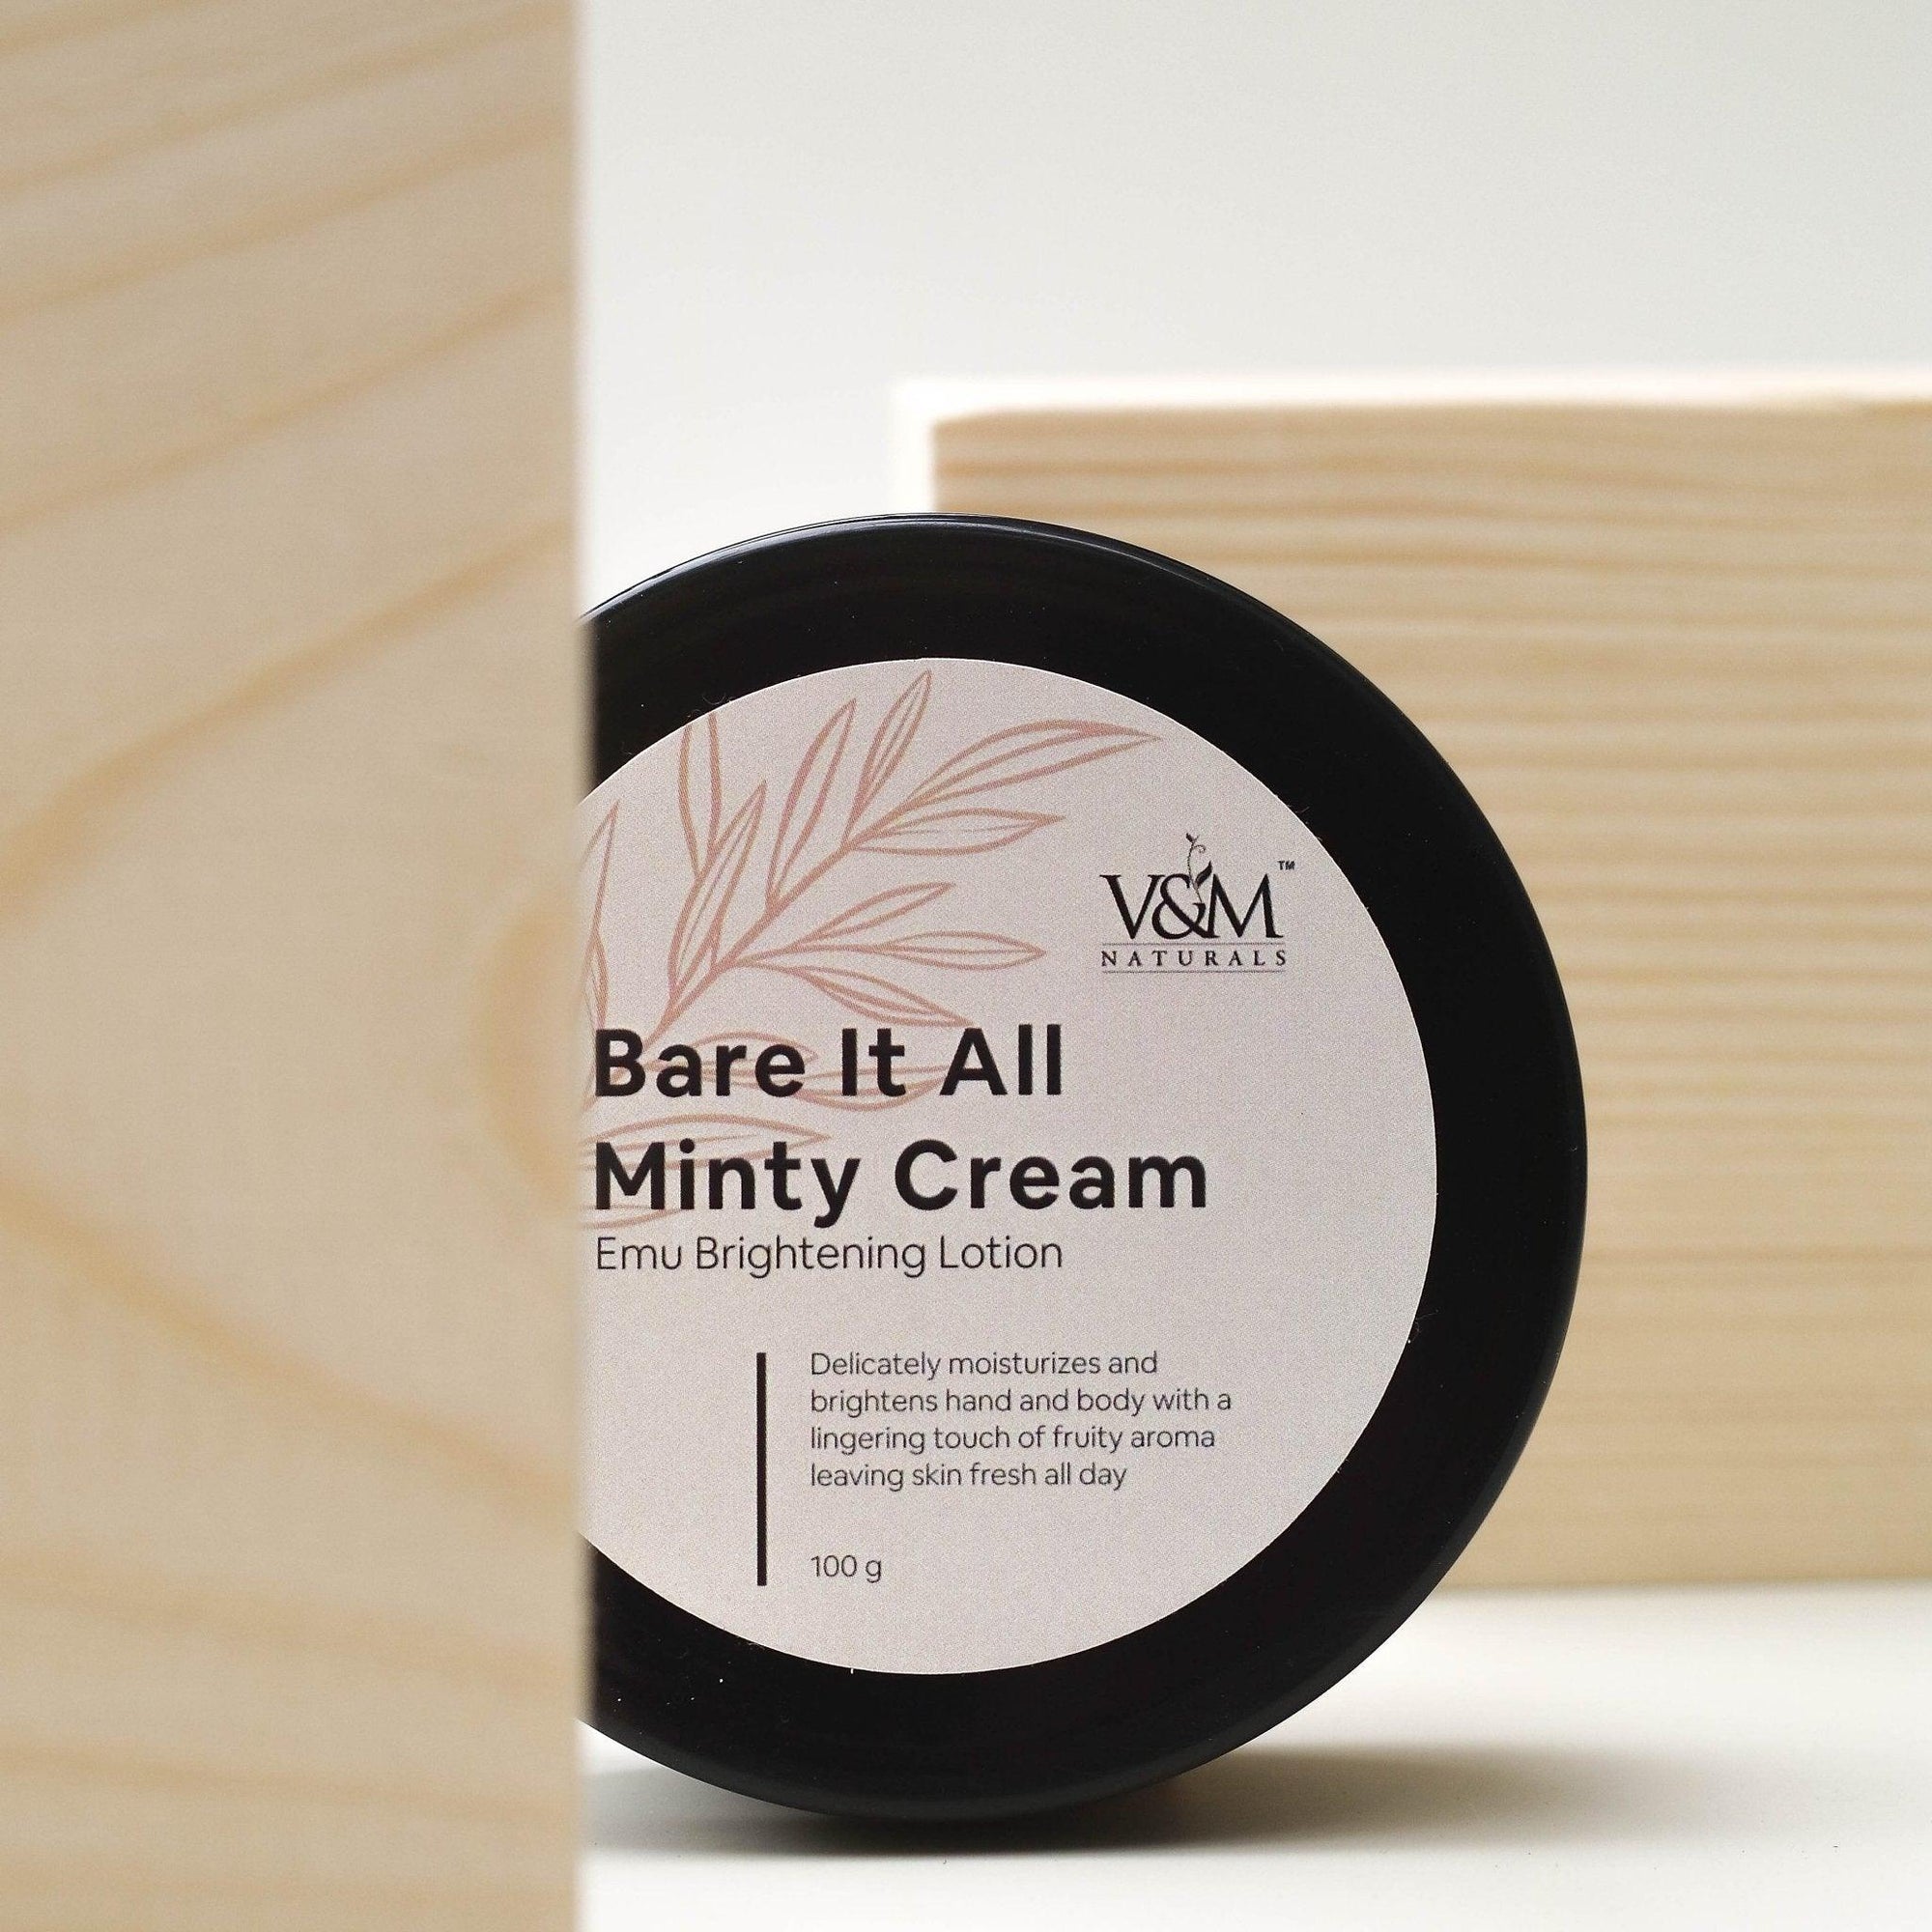 V&M Naturals Bare It All Minty Cream (Emu Brightening Lotion) - bluelily.me